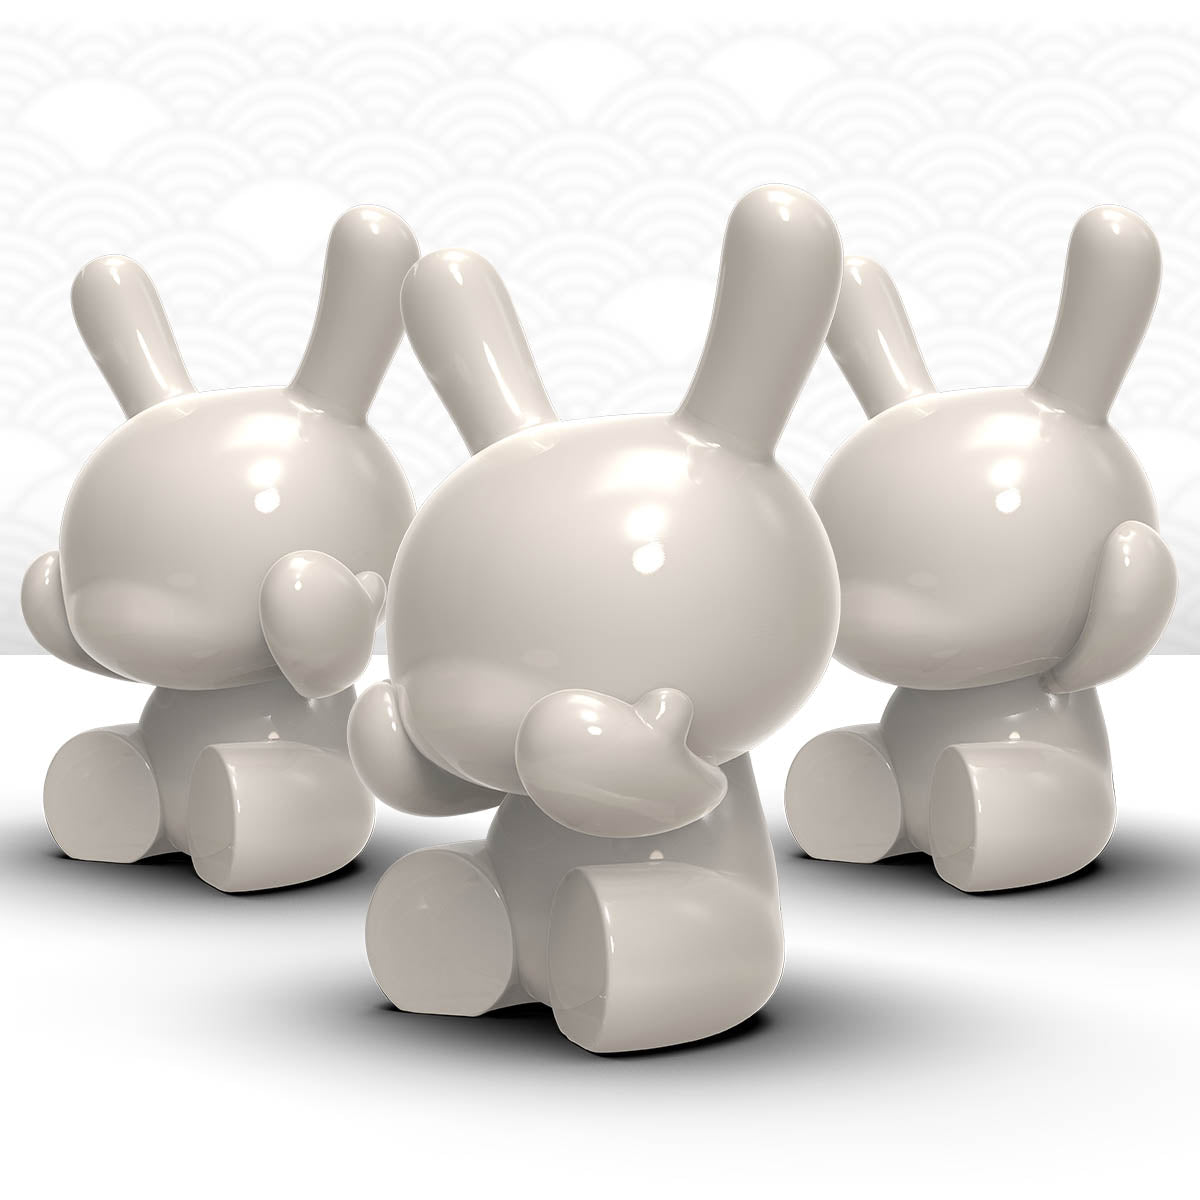 Three Wise Dunnys 5” Porcelain 3-Pack - White Edition - Limited Edition of 500 - Kidrobot